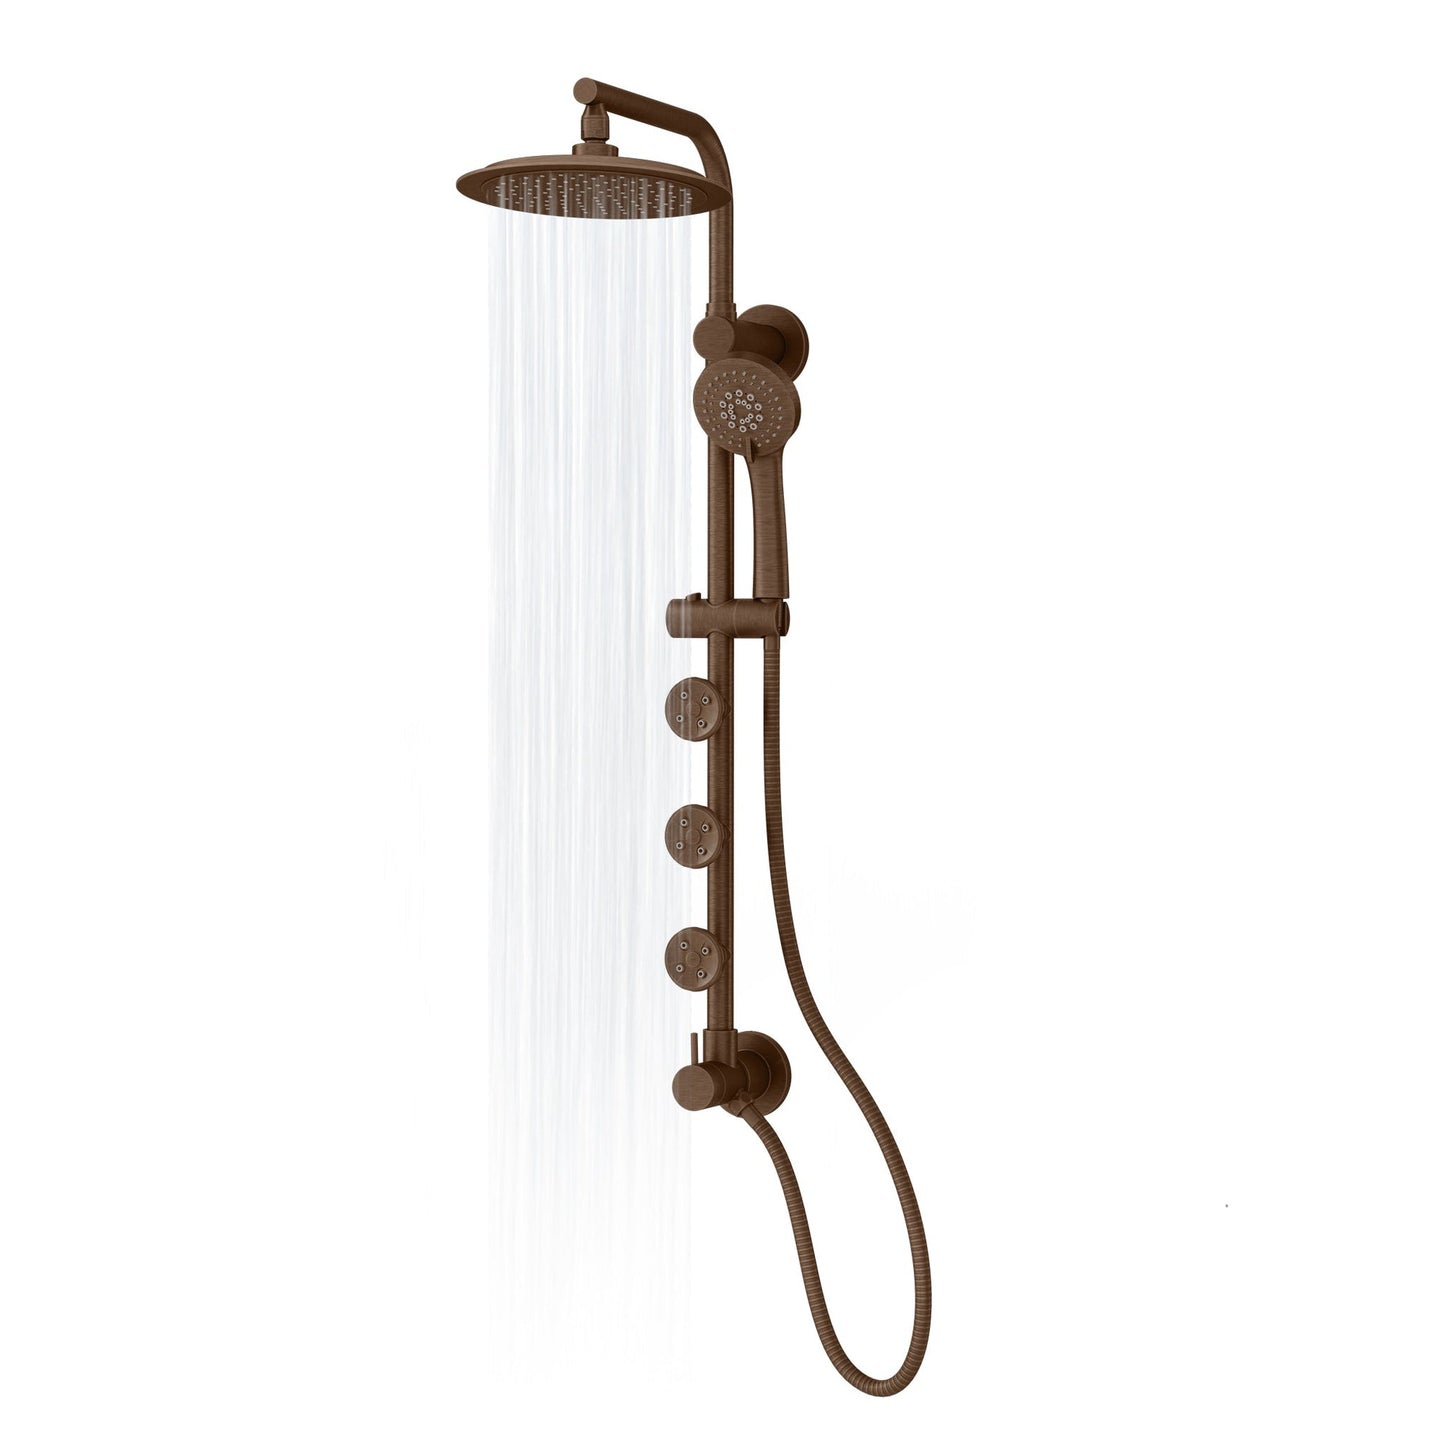 PULSE ShowerSpas Lanai 1.8 GPM Rain Shower System in Oil Rubbed Bronze With 3-Power Spray Body Jet and 3-Function Hand Shower